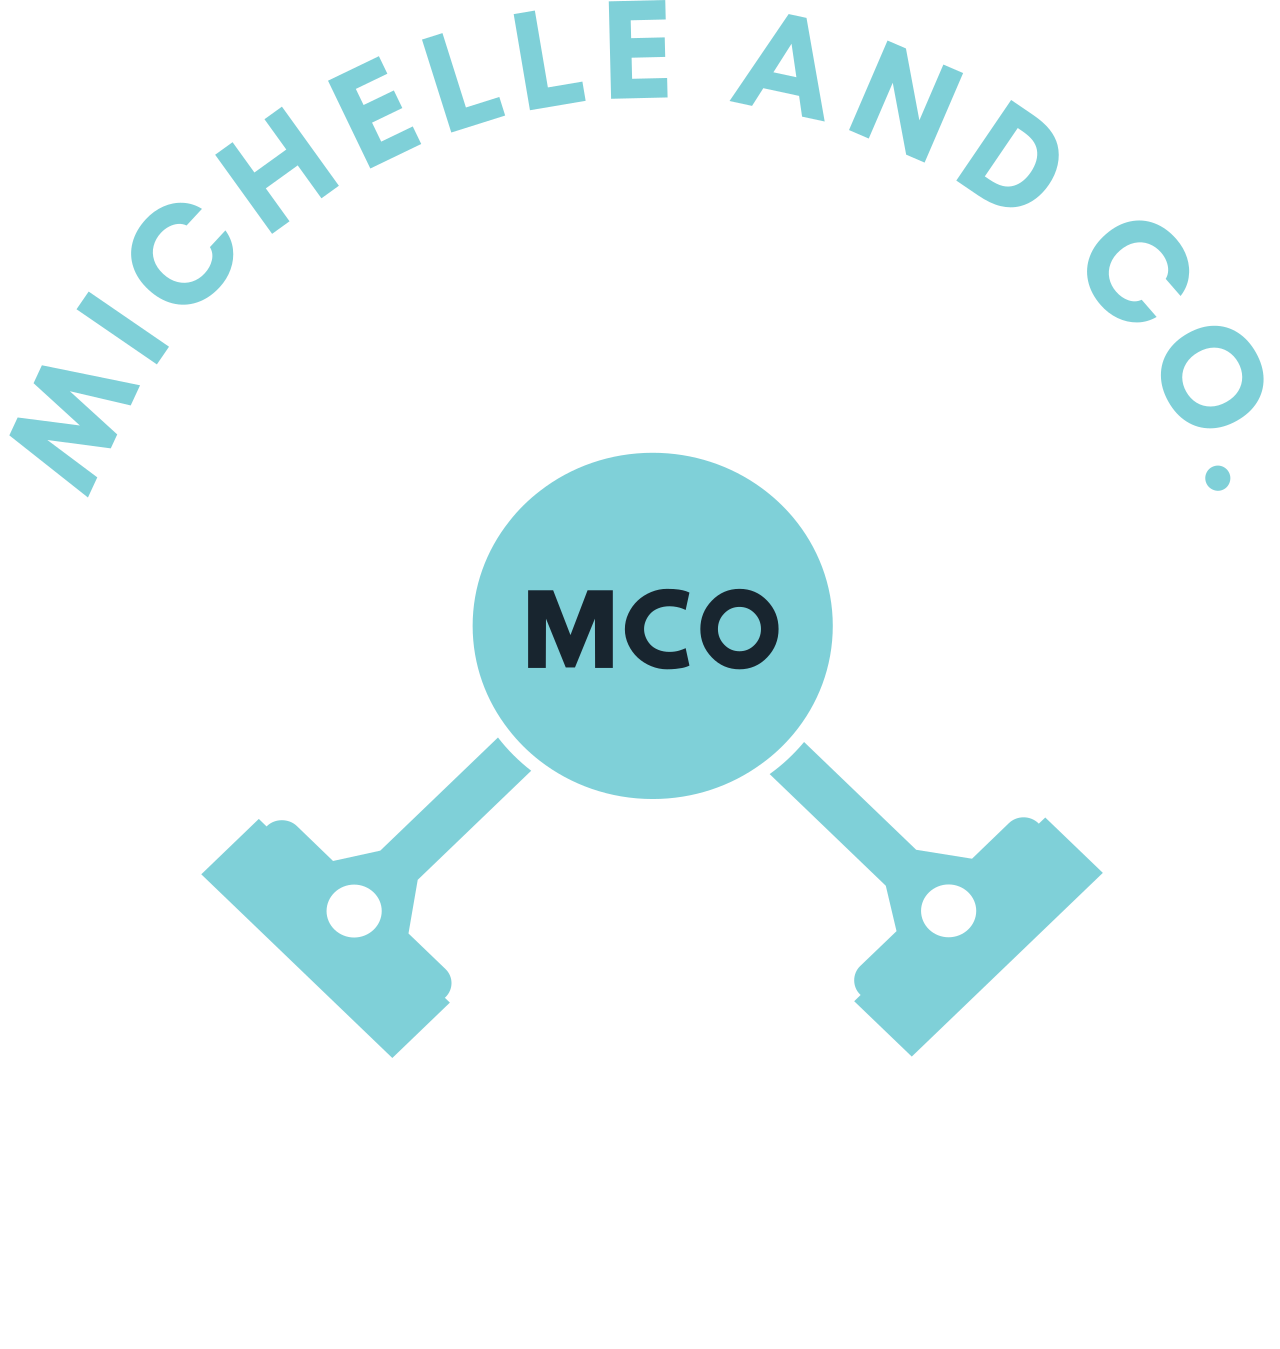 MICHELLE AND CO.'s logo